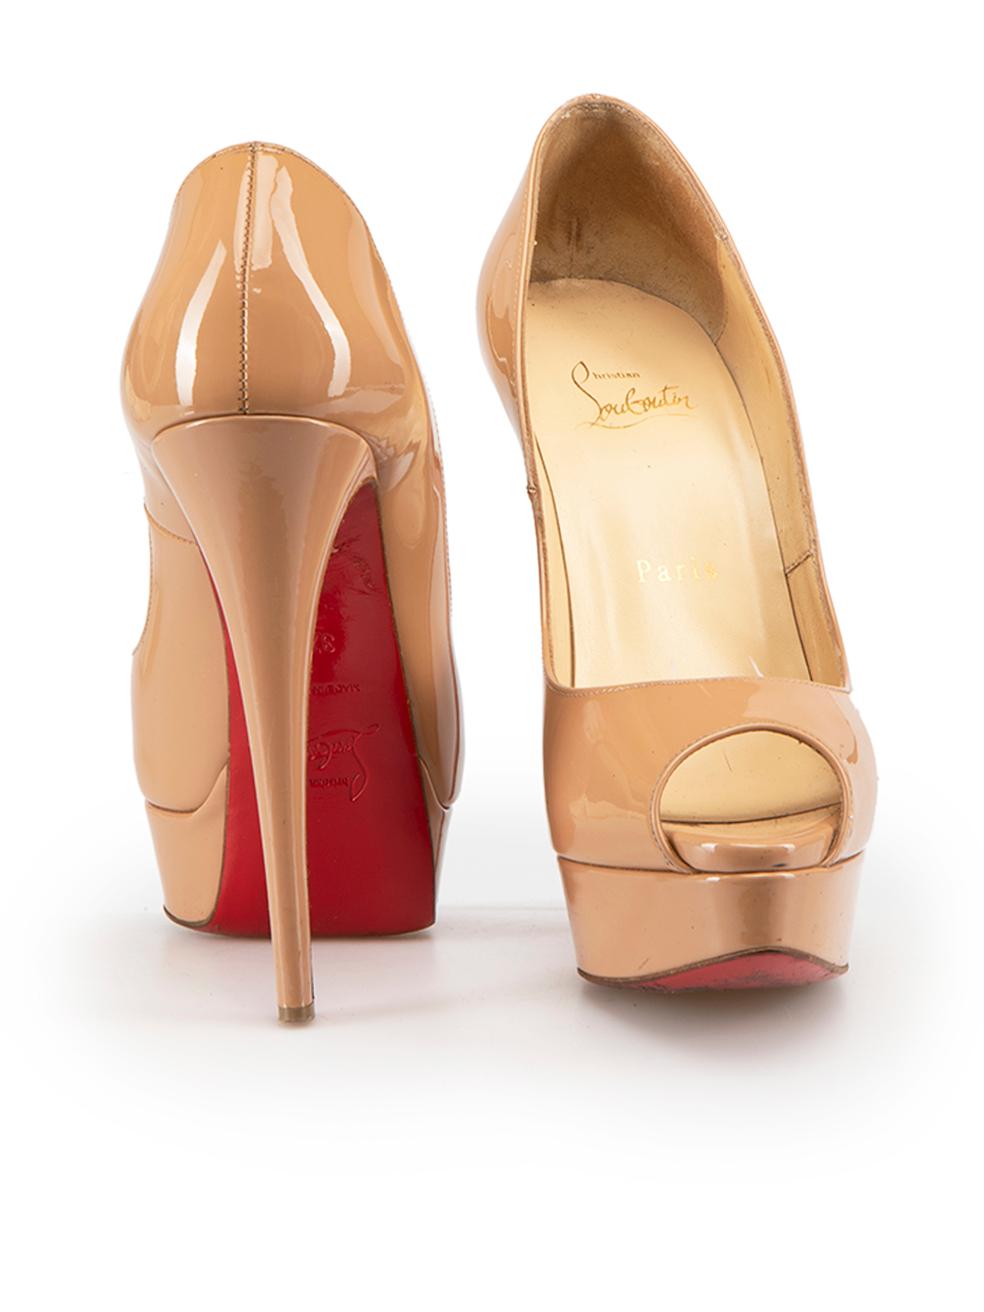 Christian Louboutin Nude Patent Platform Peep Heels Size IT 37.5 In Good Condition For Sale In London, GB